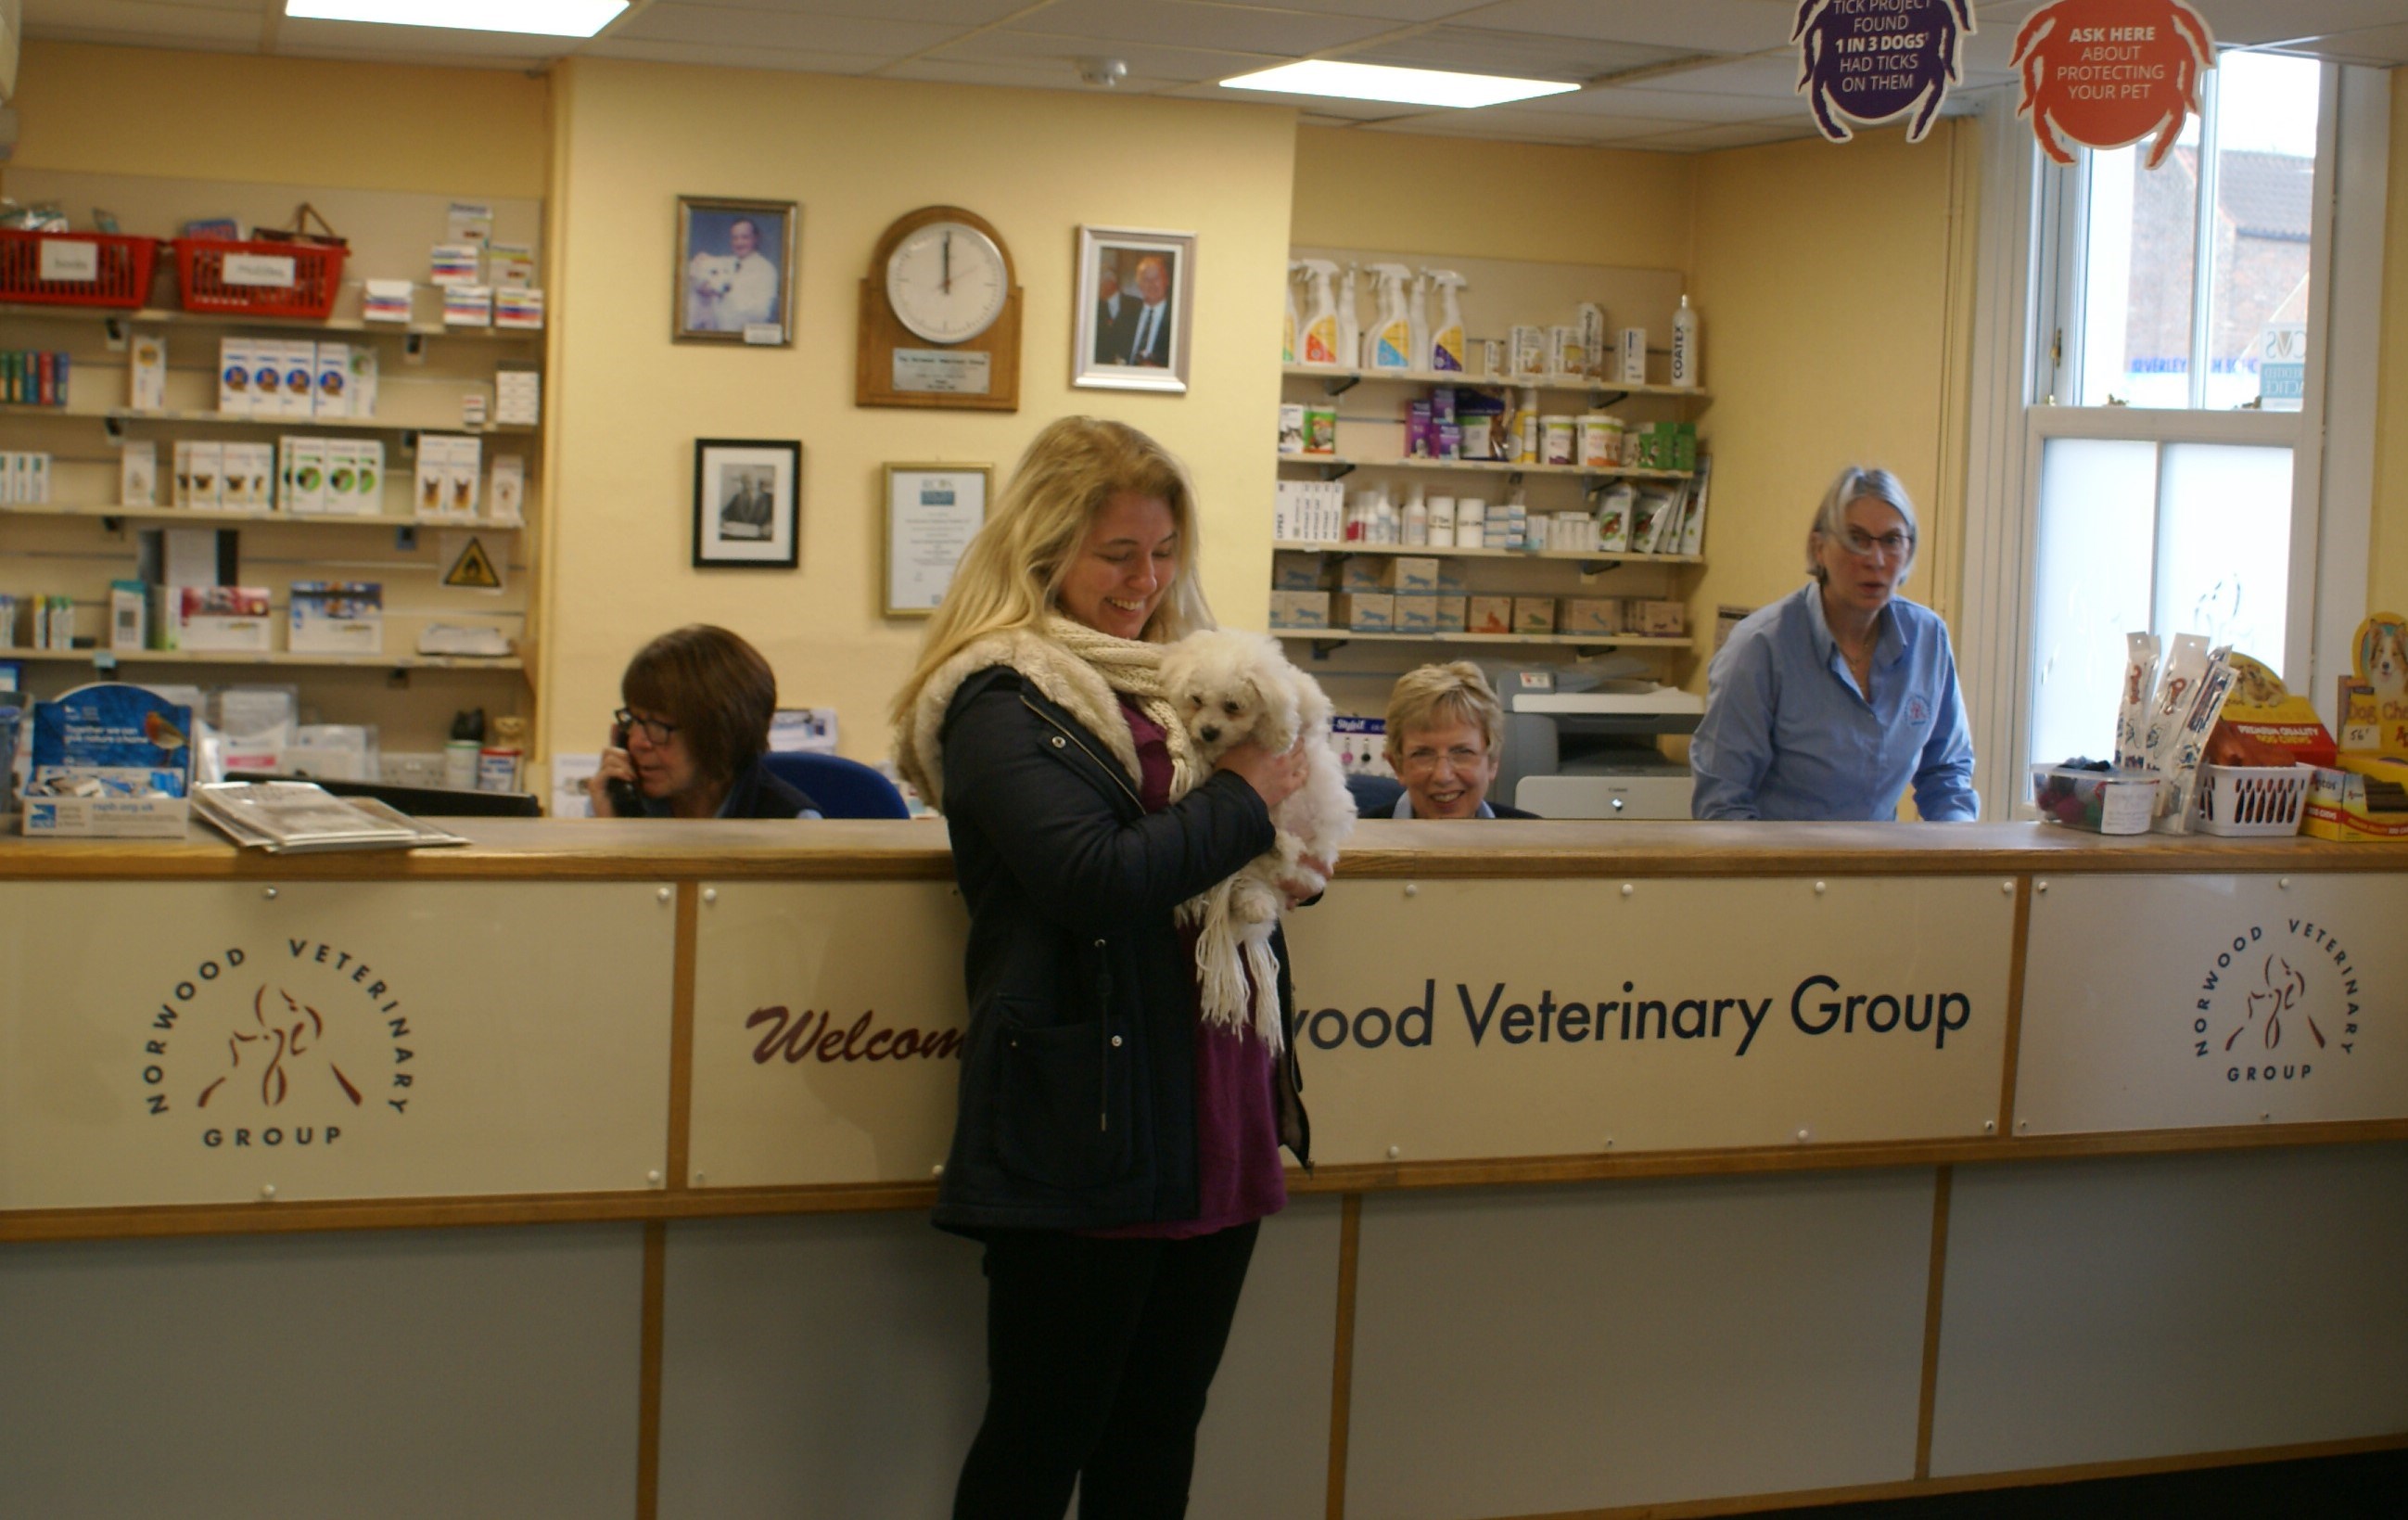 Reception and welcome to Norwood Veterinary Group Beverley